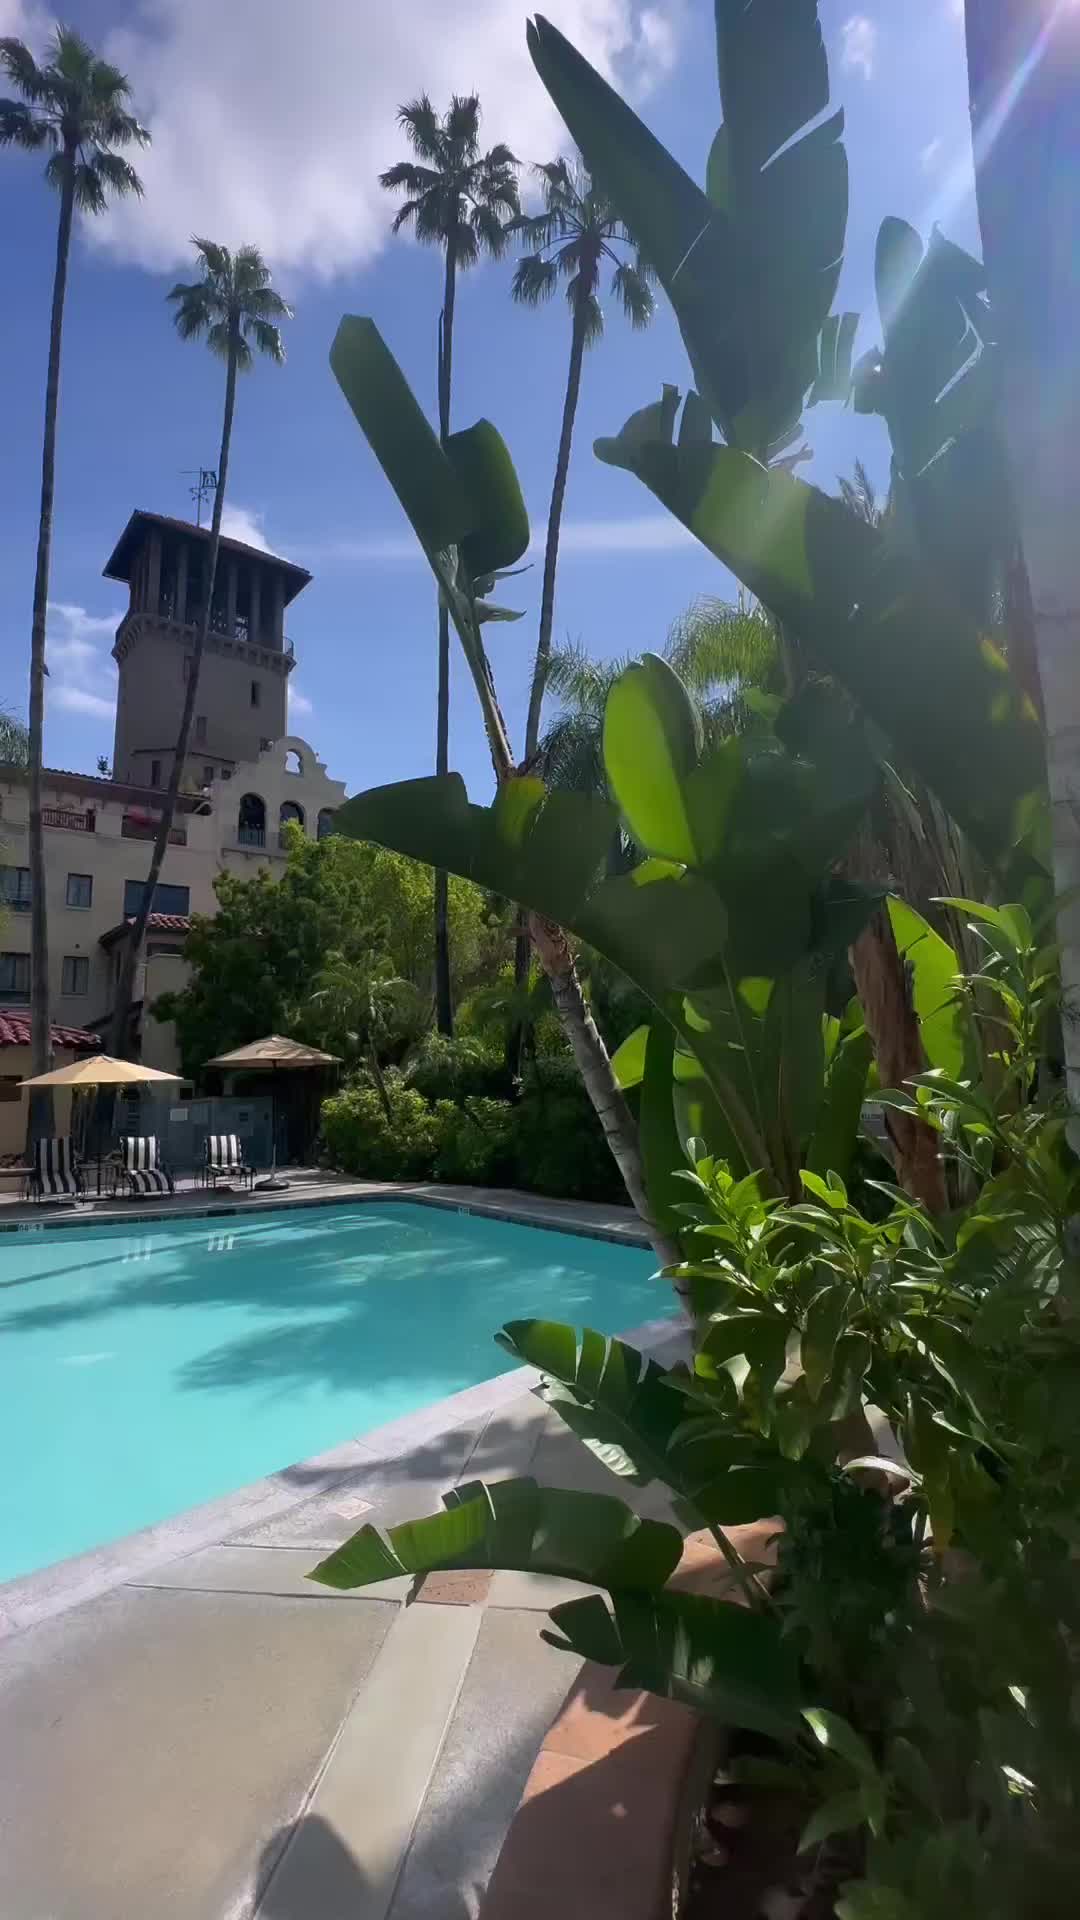 Celebrate Every Morning at The Mission Inn Hotel & Spa